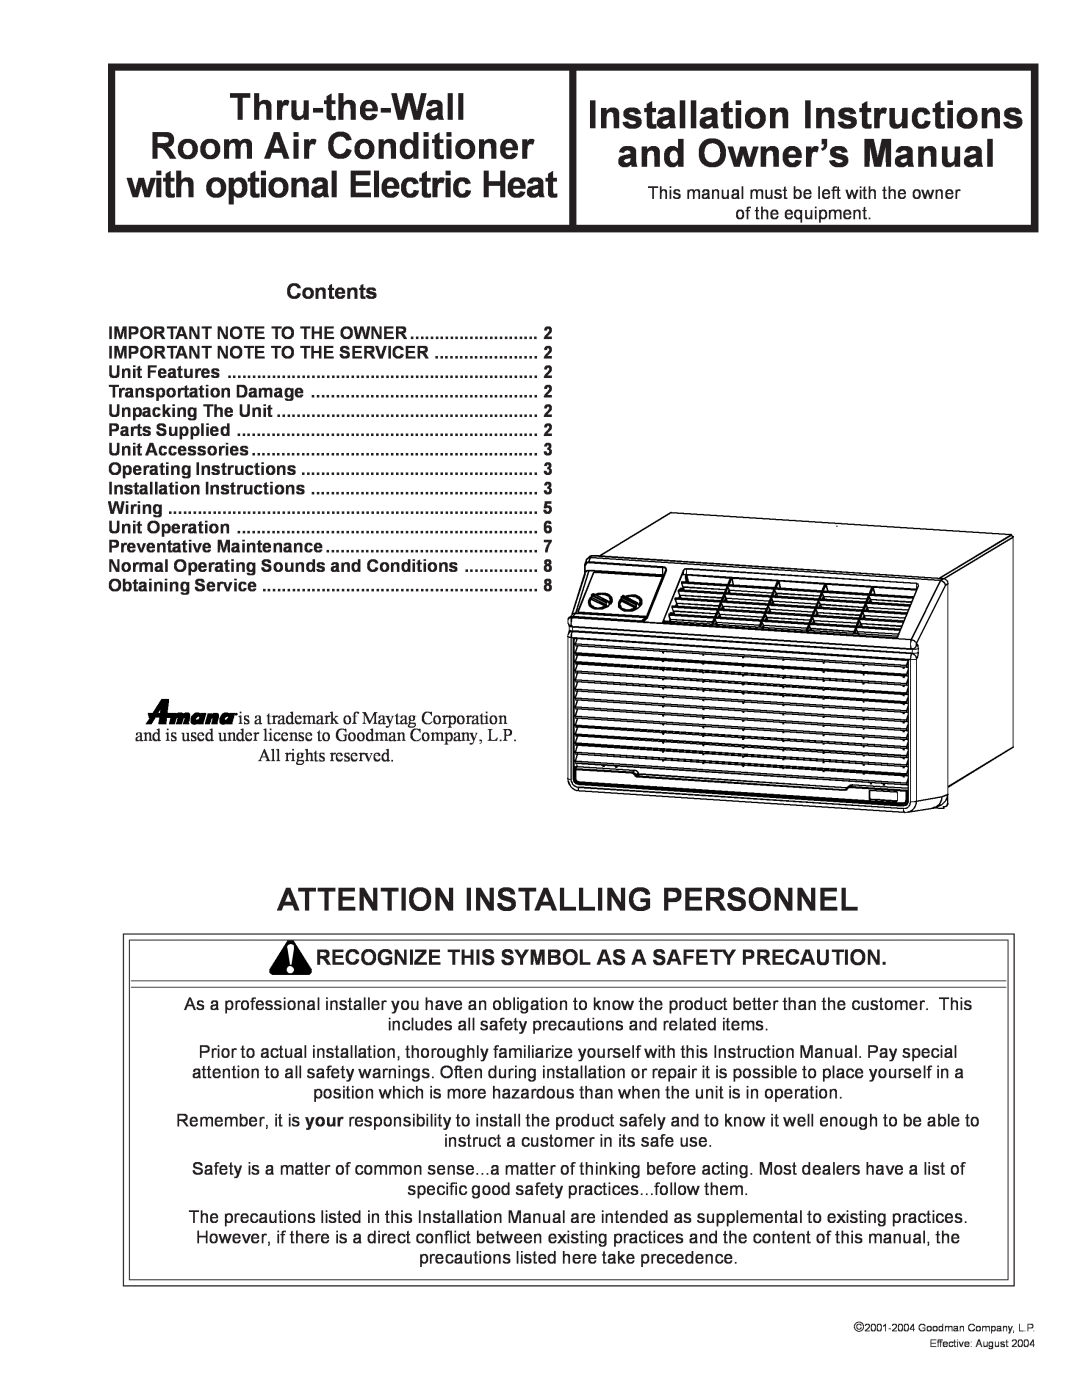 Maytag Thru-the-Wall Room Air Conditioner installation instructions with optional Electric Heat 